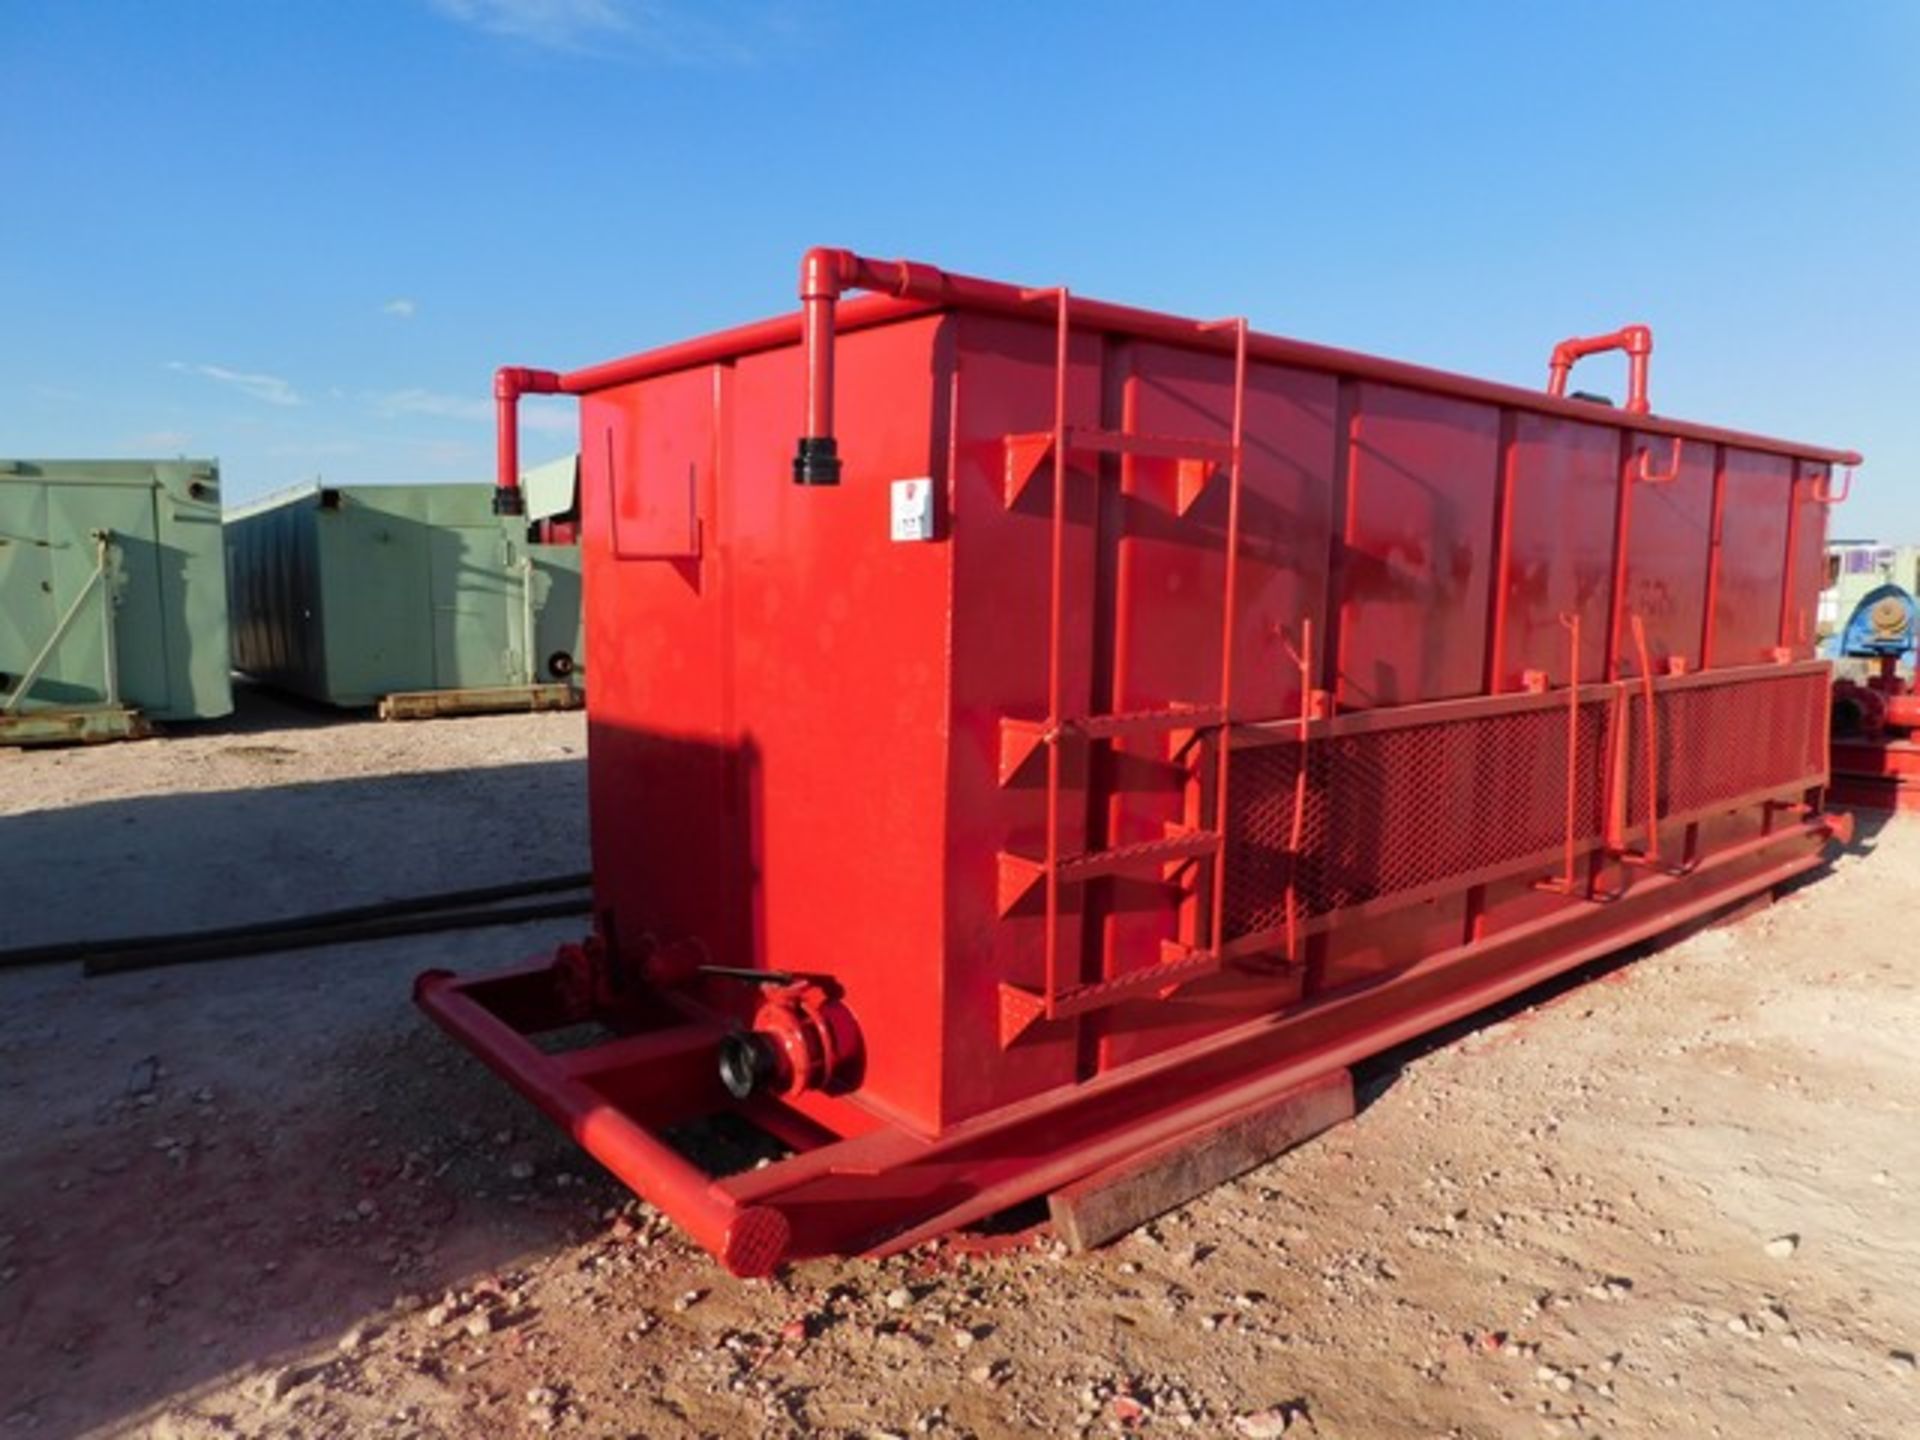 Located in YARD 1 - Midland, TX (6101) 6'H X 6.6'W X 18'L (2) COMPARTMENT FLAT BOTTOM REVERSE PIT,